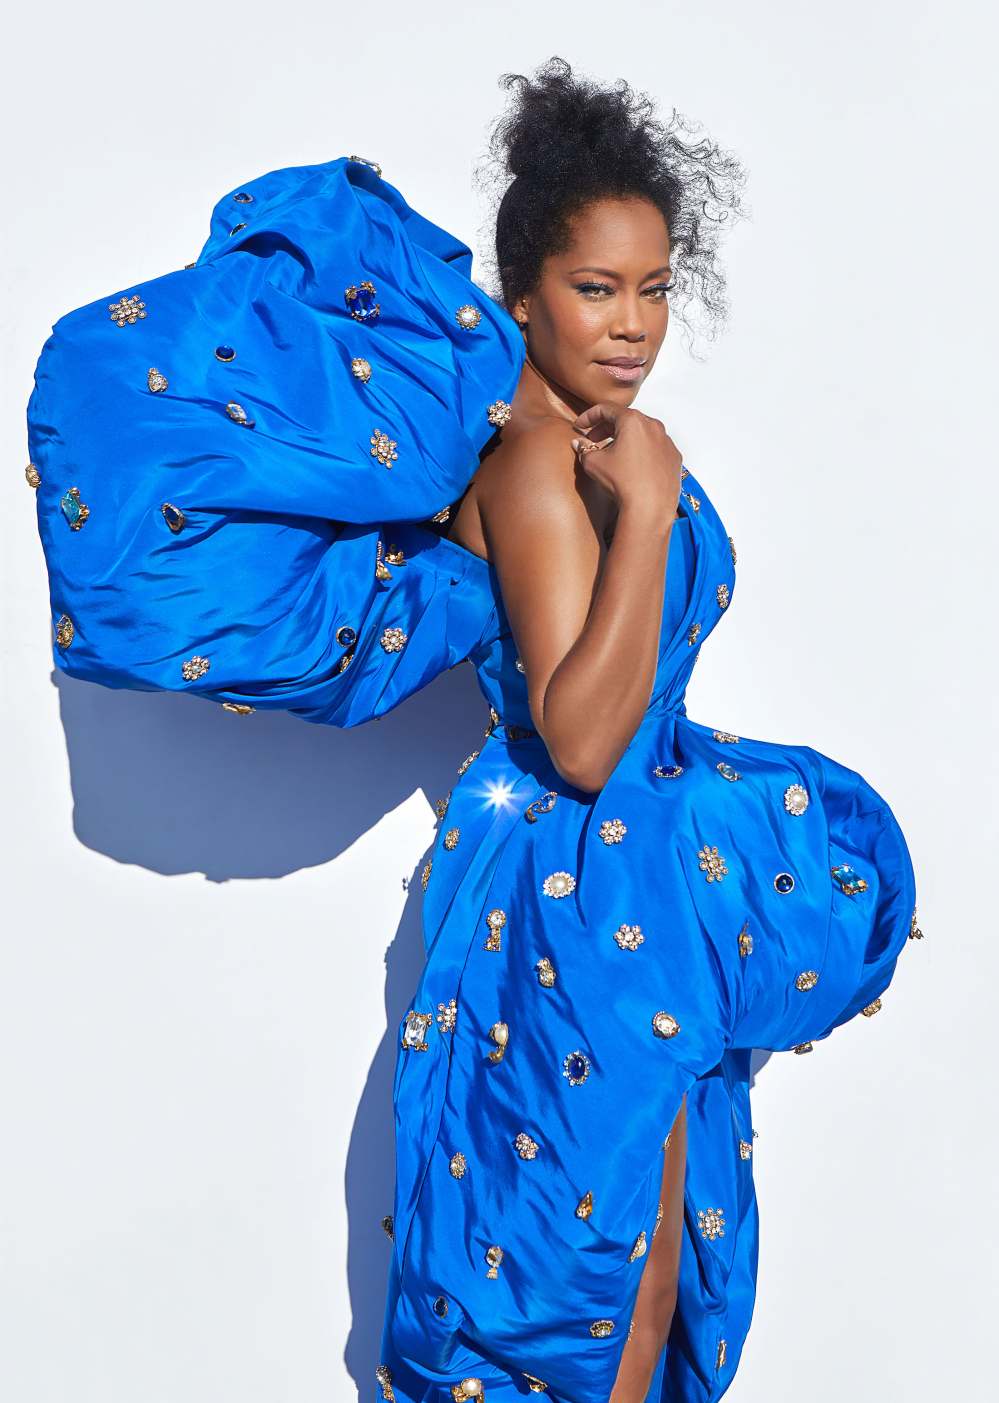 Regina King's 2020 Emmy Looks Are Being Auctioned Off For a Good Cause